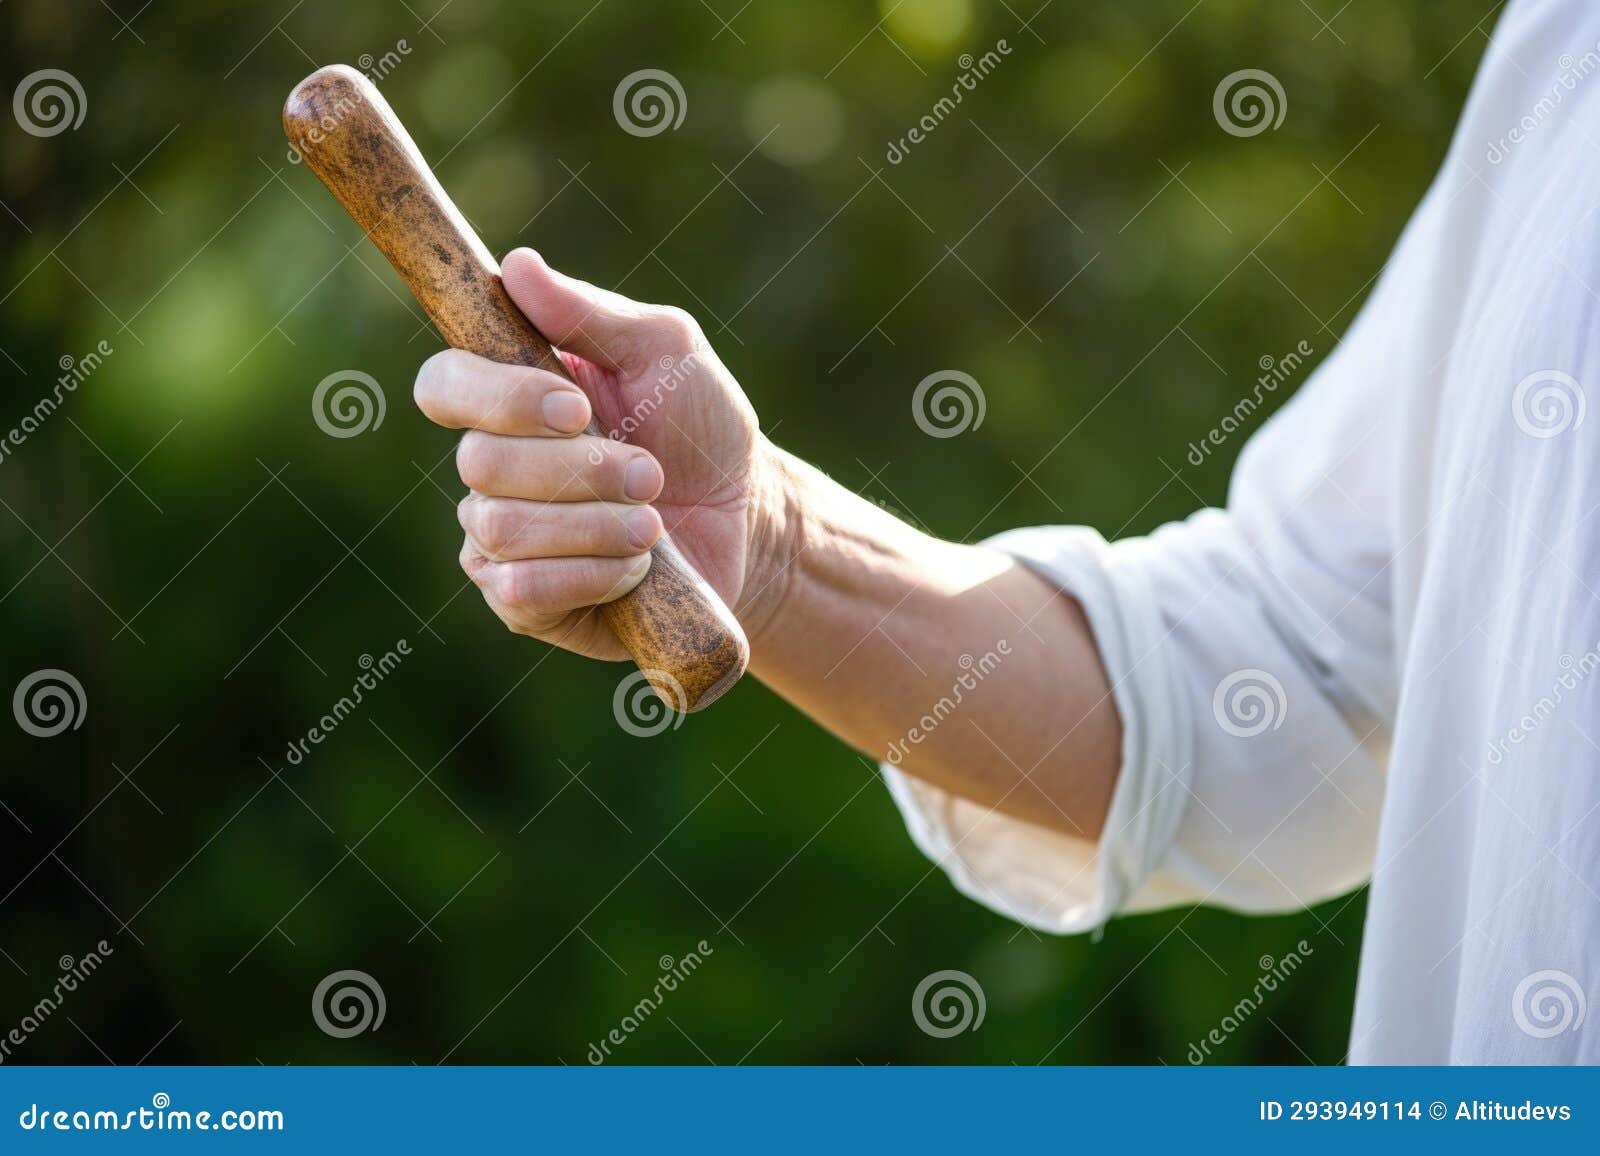 hand holding up a qi gong wand